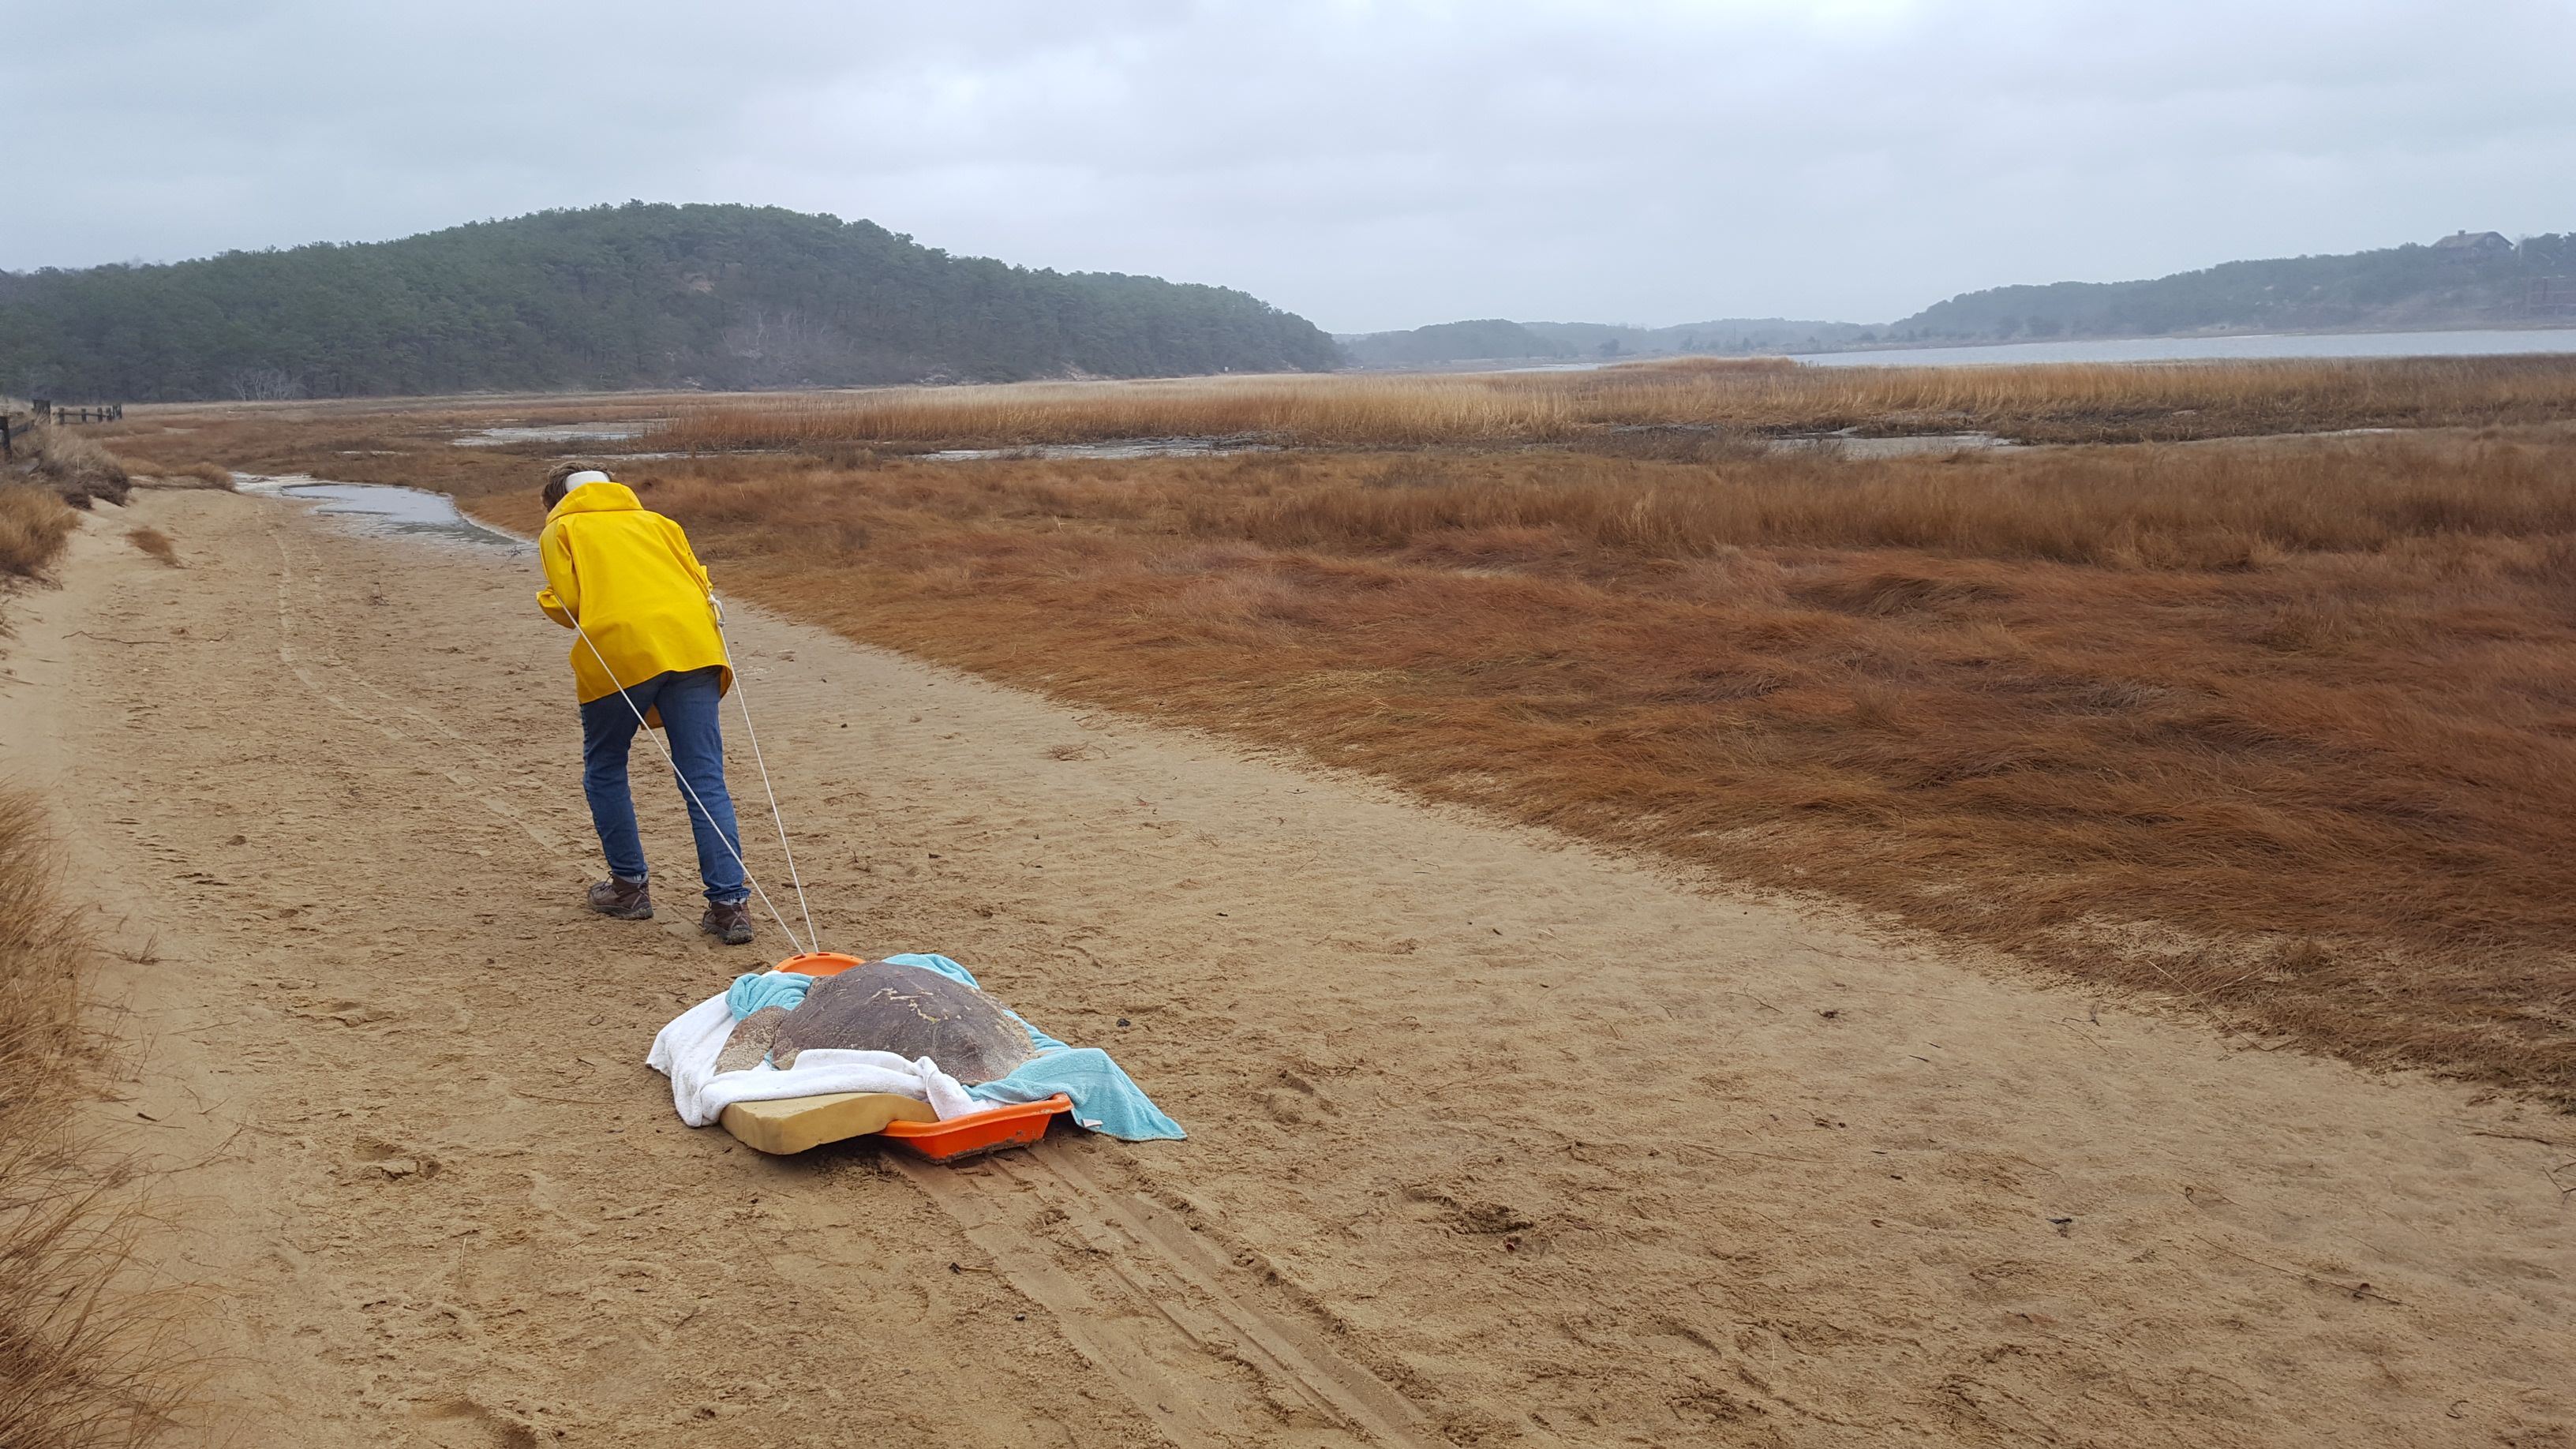 Turtle team member Karen Dourdeville takes a turn dragging this nearly 95 pound loggerhead from more than 2 miles out on Wellfleet's Great Island.